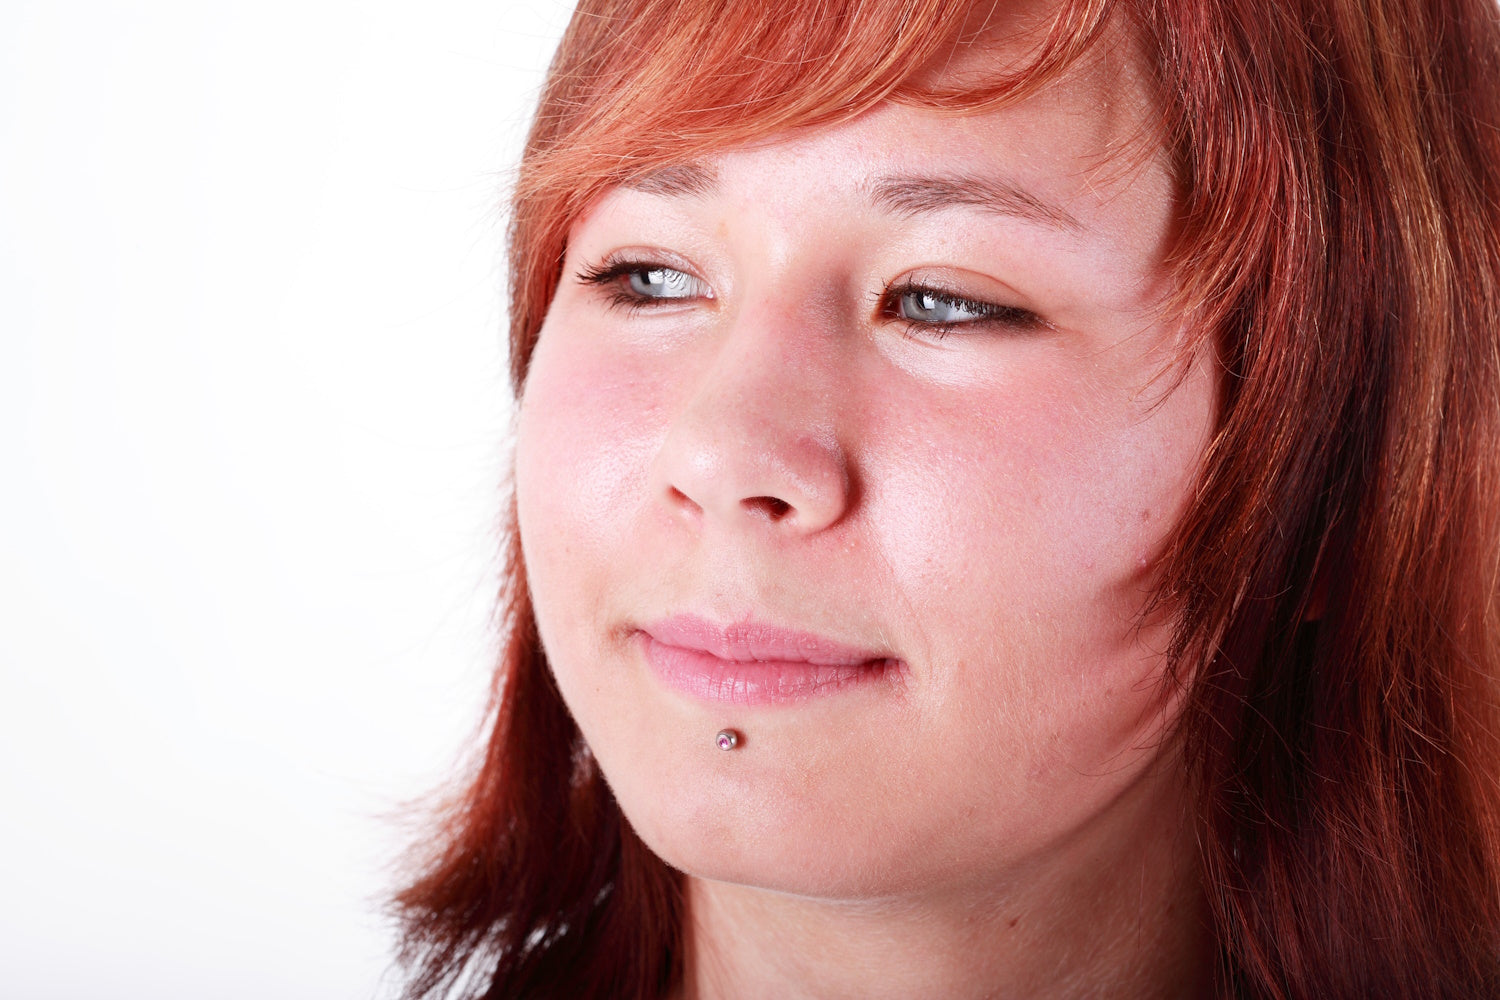 A female with a labret piercing pictured white a white background.